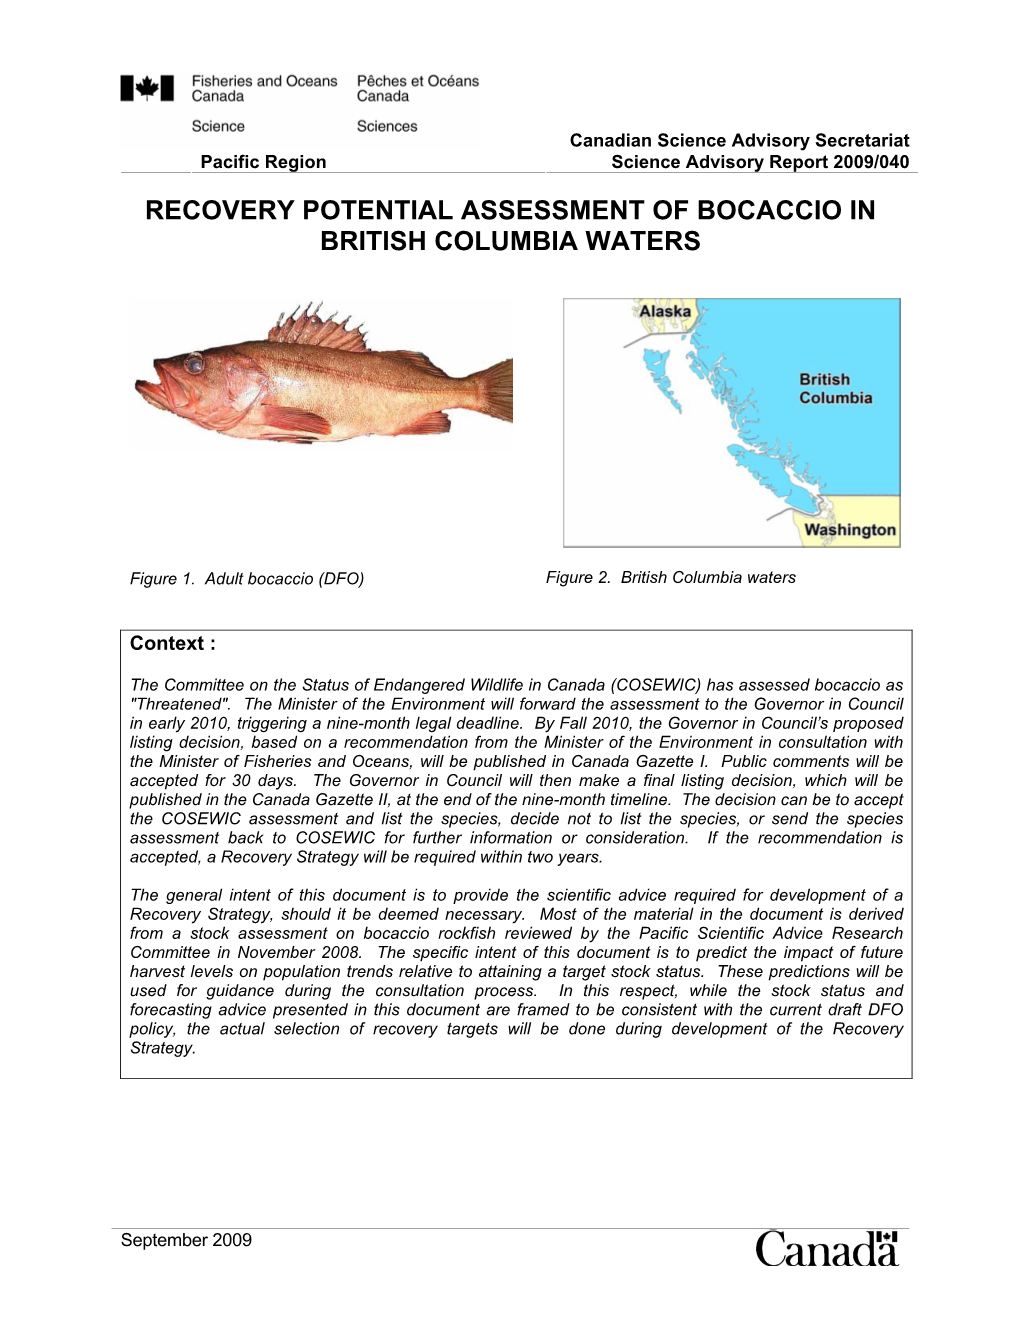 Recovery Potential Assessment of Bocaccio in British Columbia Waters